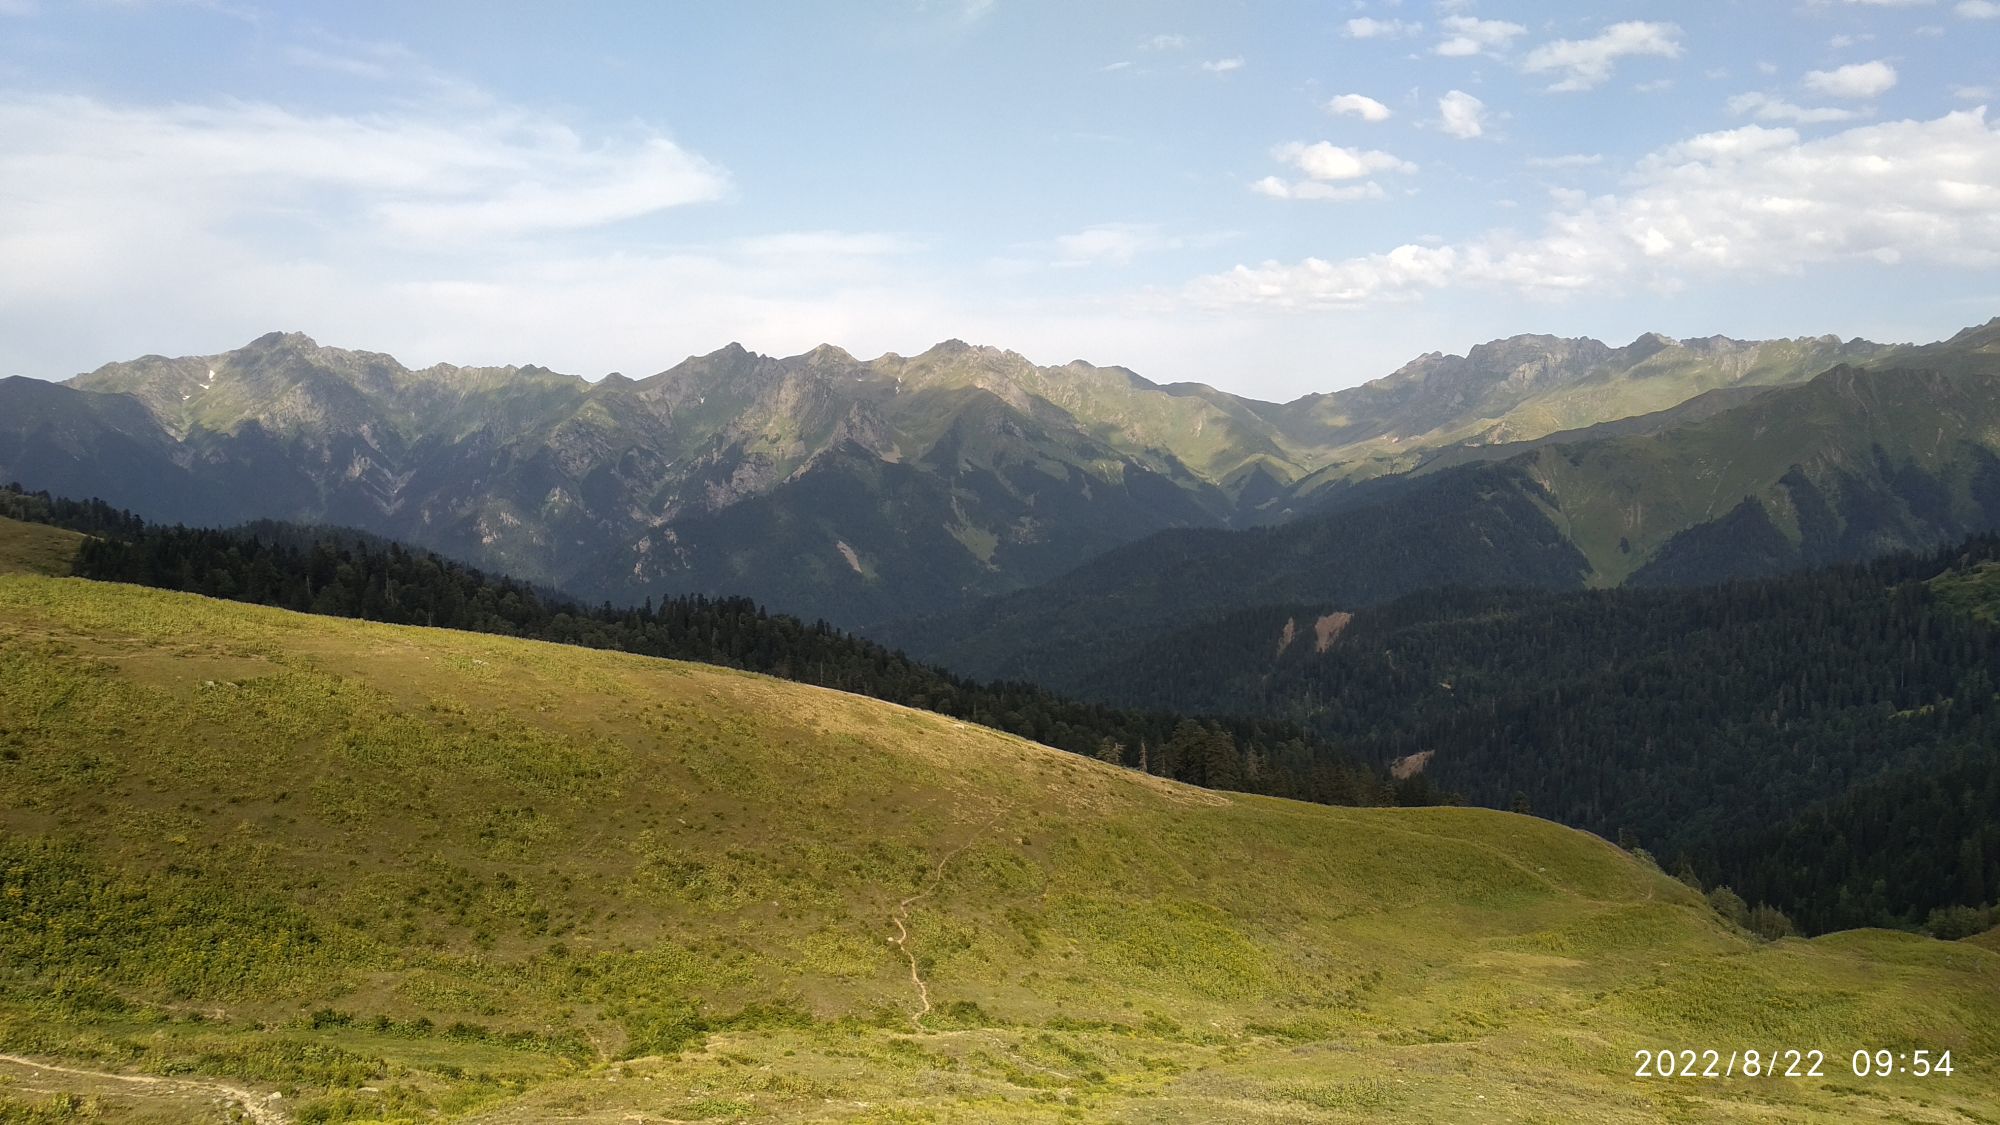 Lebarde valley from alpine meadows above